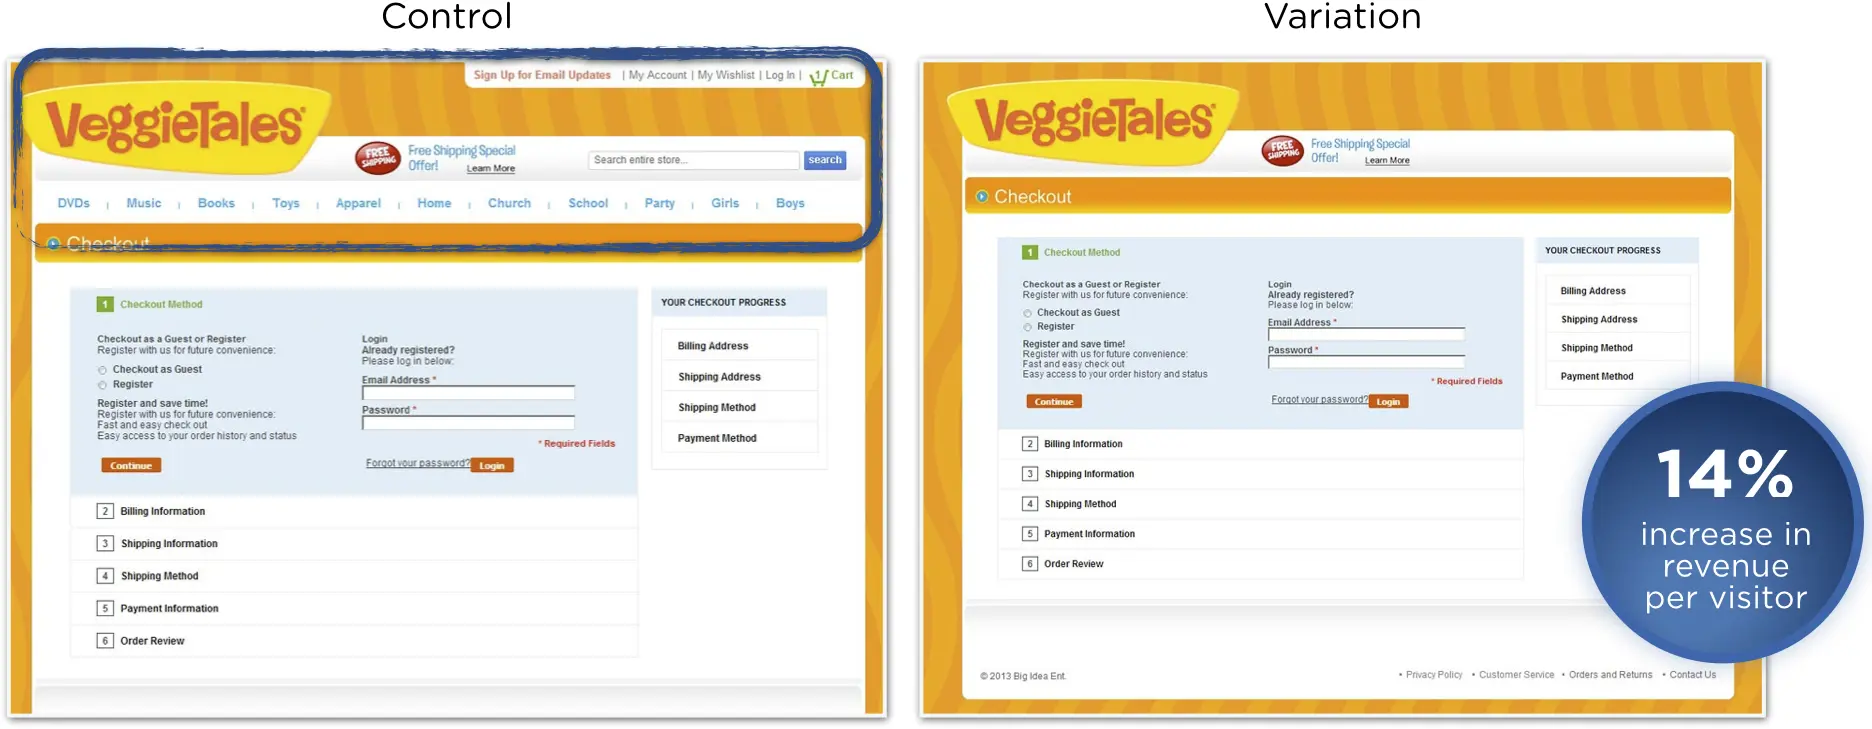 Sample of ecommerce a/b test from Veggietales